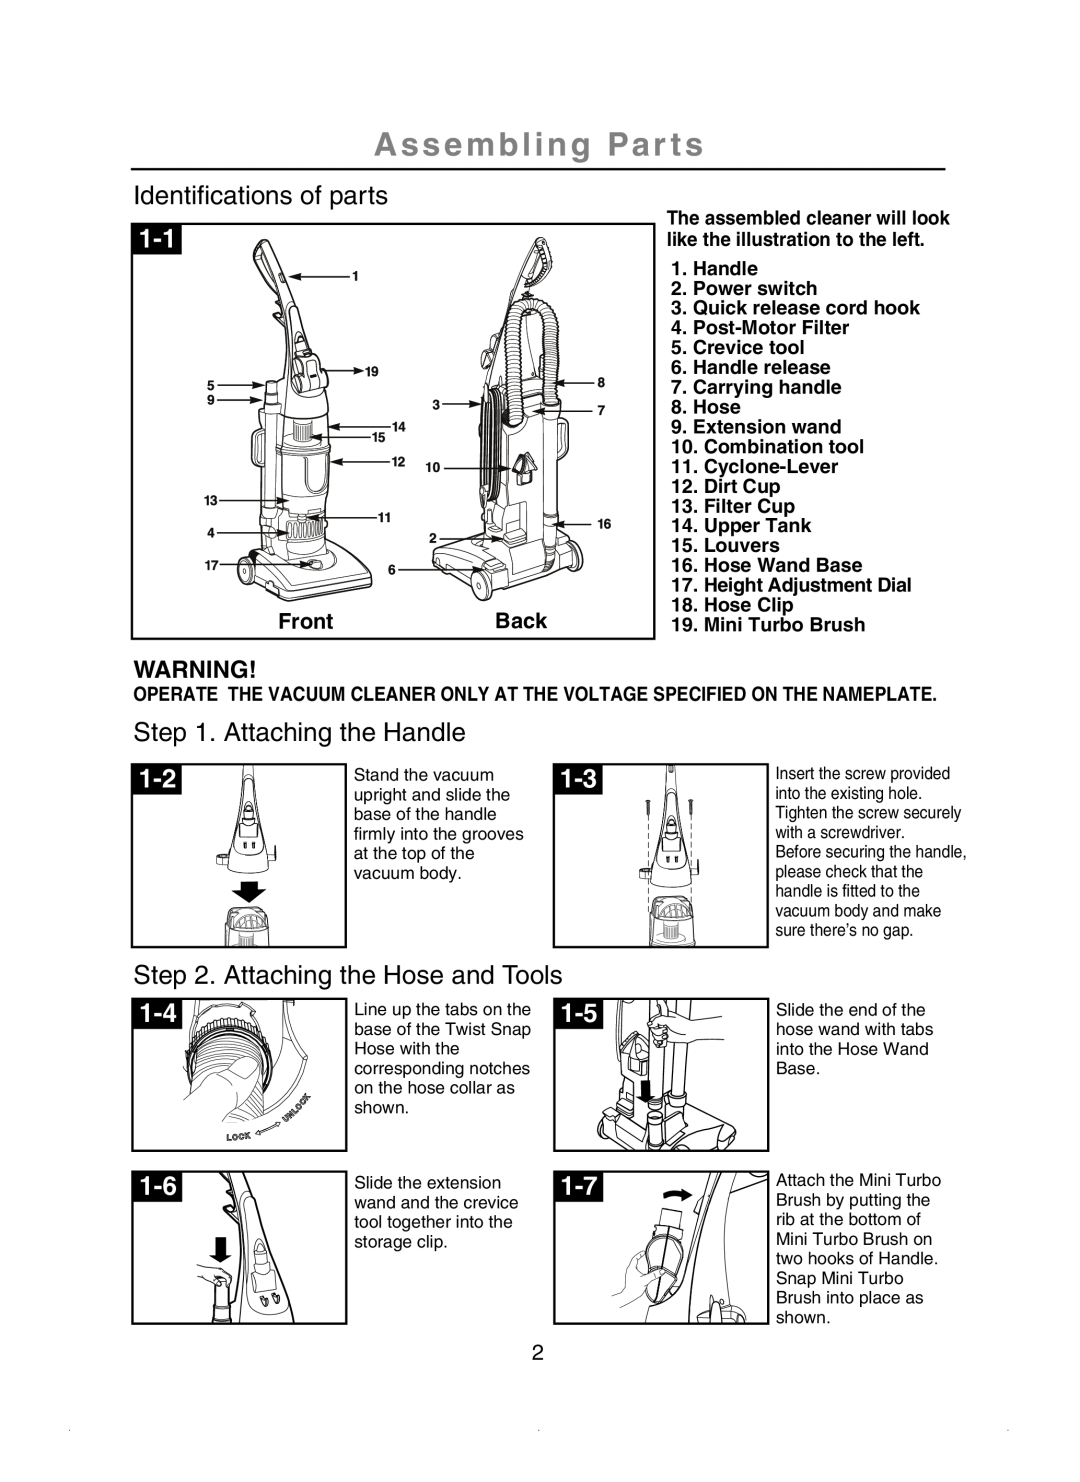 Samsung SU-2930 Series Assembling Par ts, Identifications of parts, Attaching the Handle, Attaching the Hose and Tools 